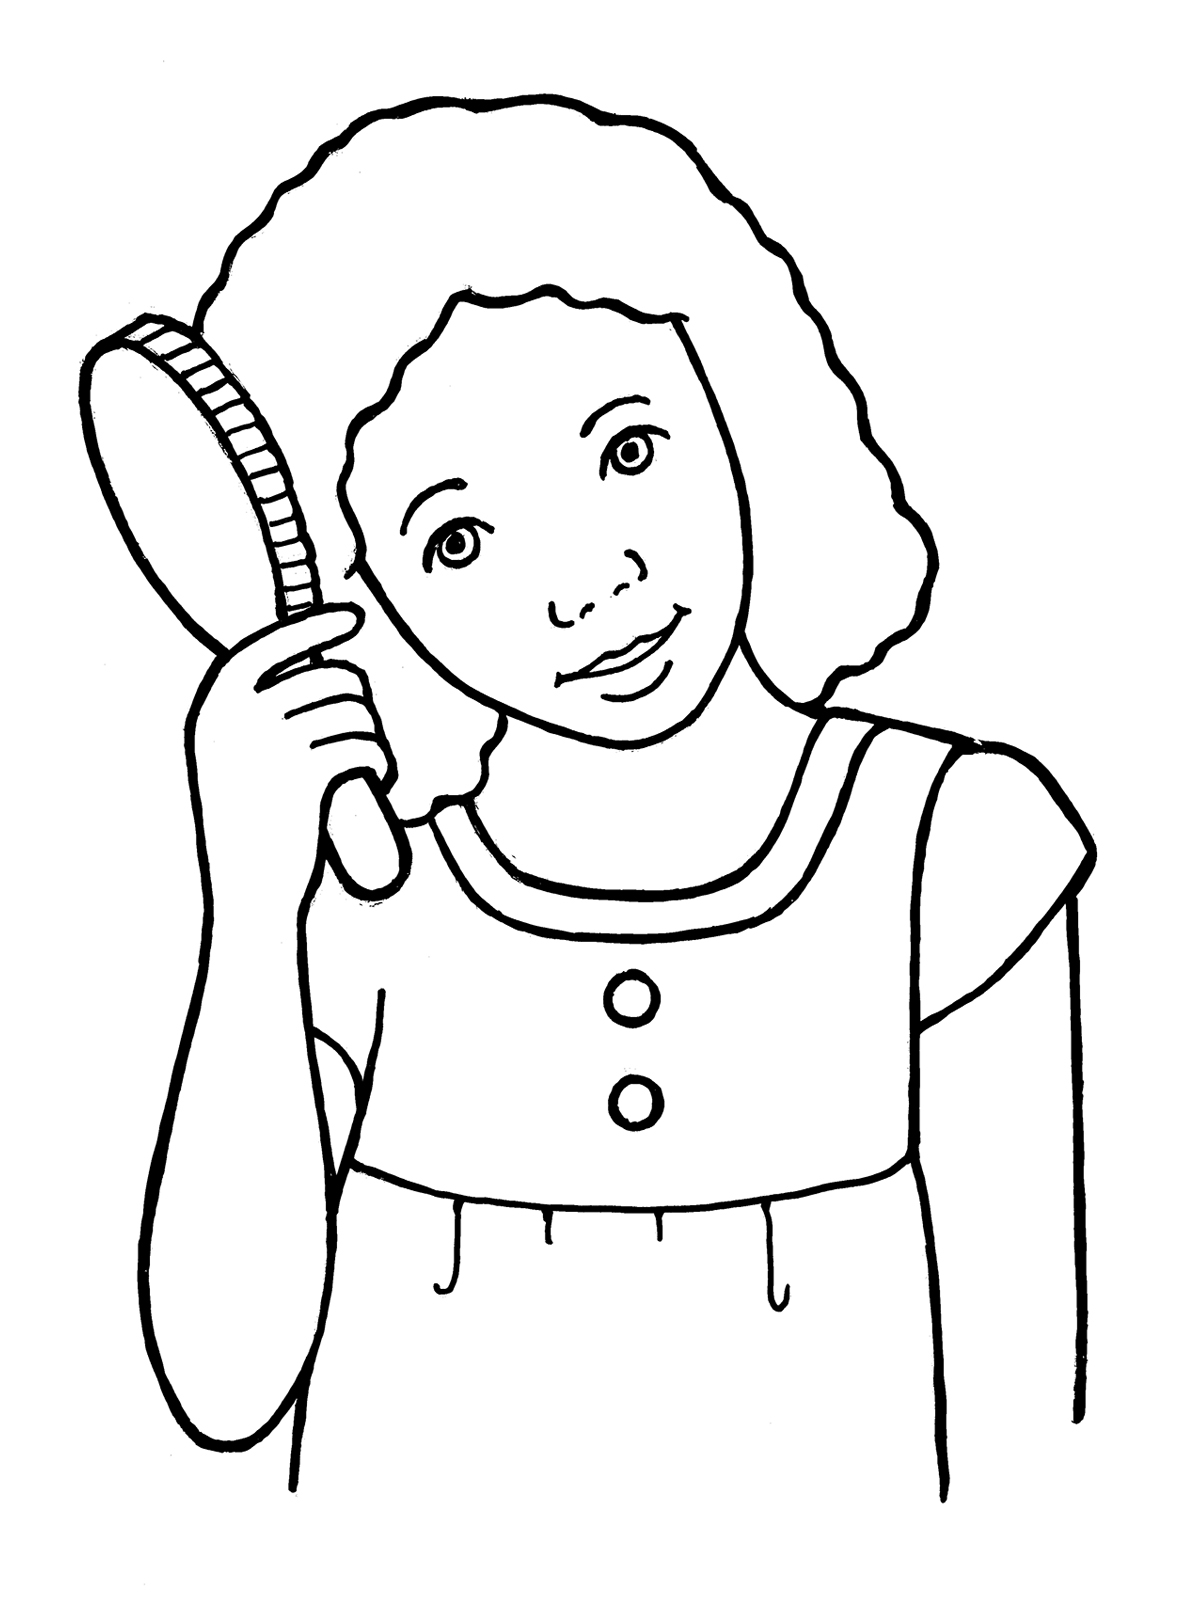 comb my hair coloring page - Clip Art Library